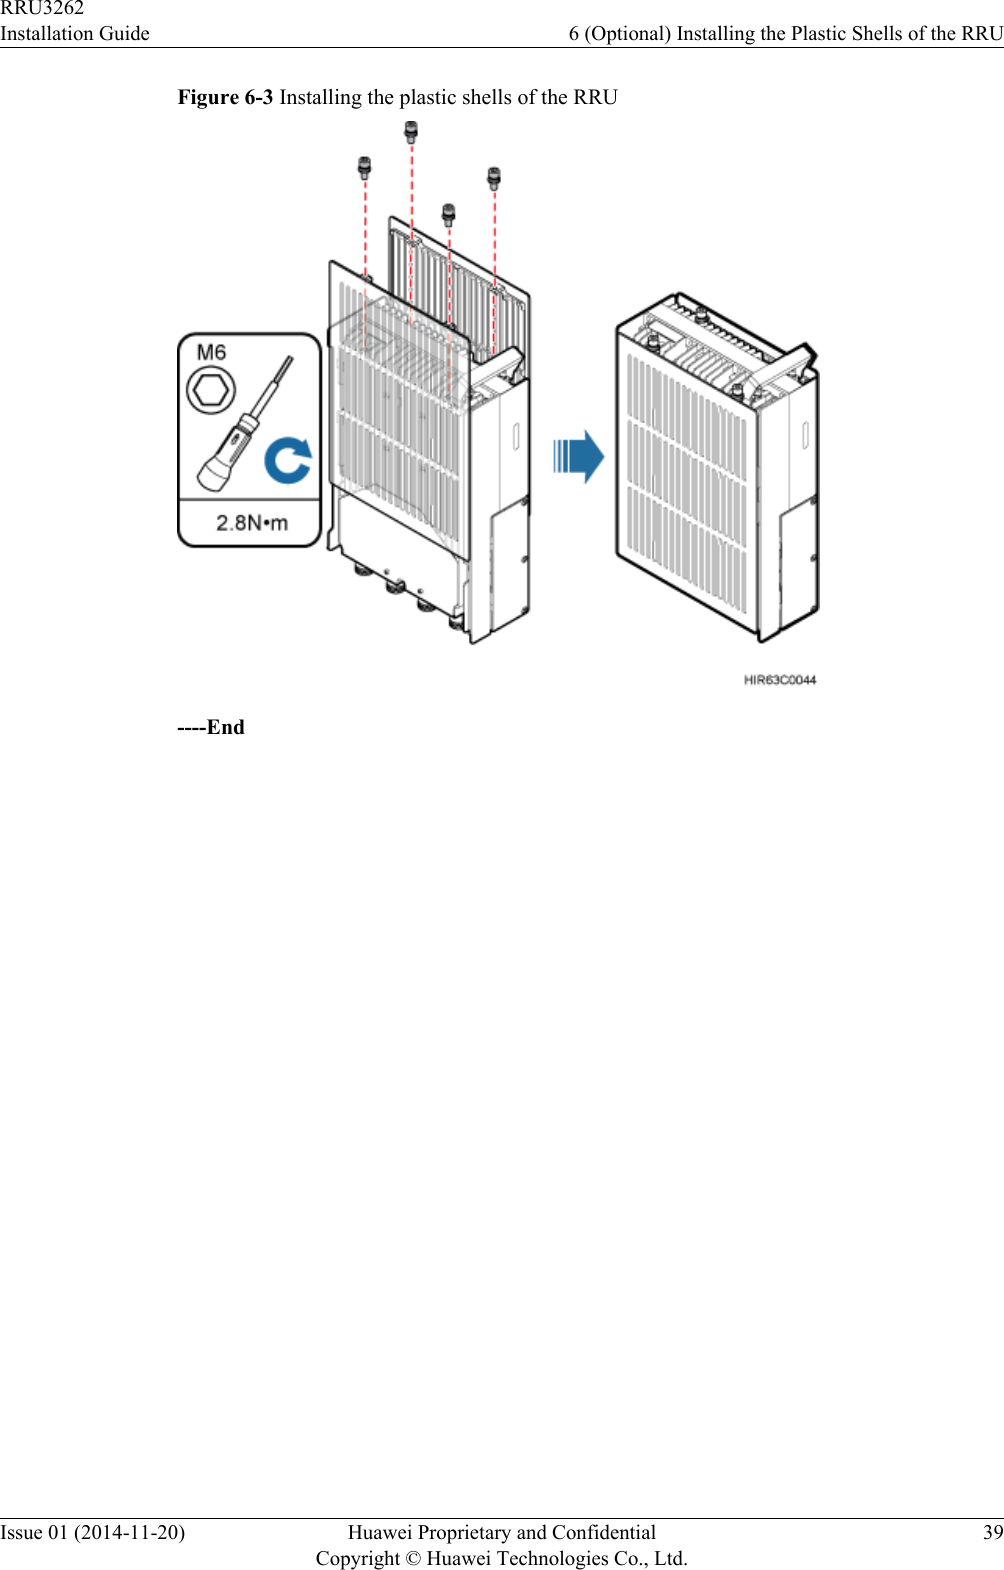 Figure 6-3 Installing the plastic shells of the RRU----EndRRU3262Installation Guide 6 (Optional) Installing the Plastic Shells of the RRUIssue 01 (2014-11-20) Huawei Proprietary and ConfidentialCopyright © Huawei Technologies Co., Ltd.39